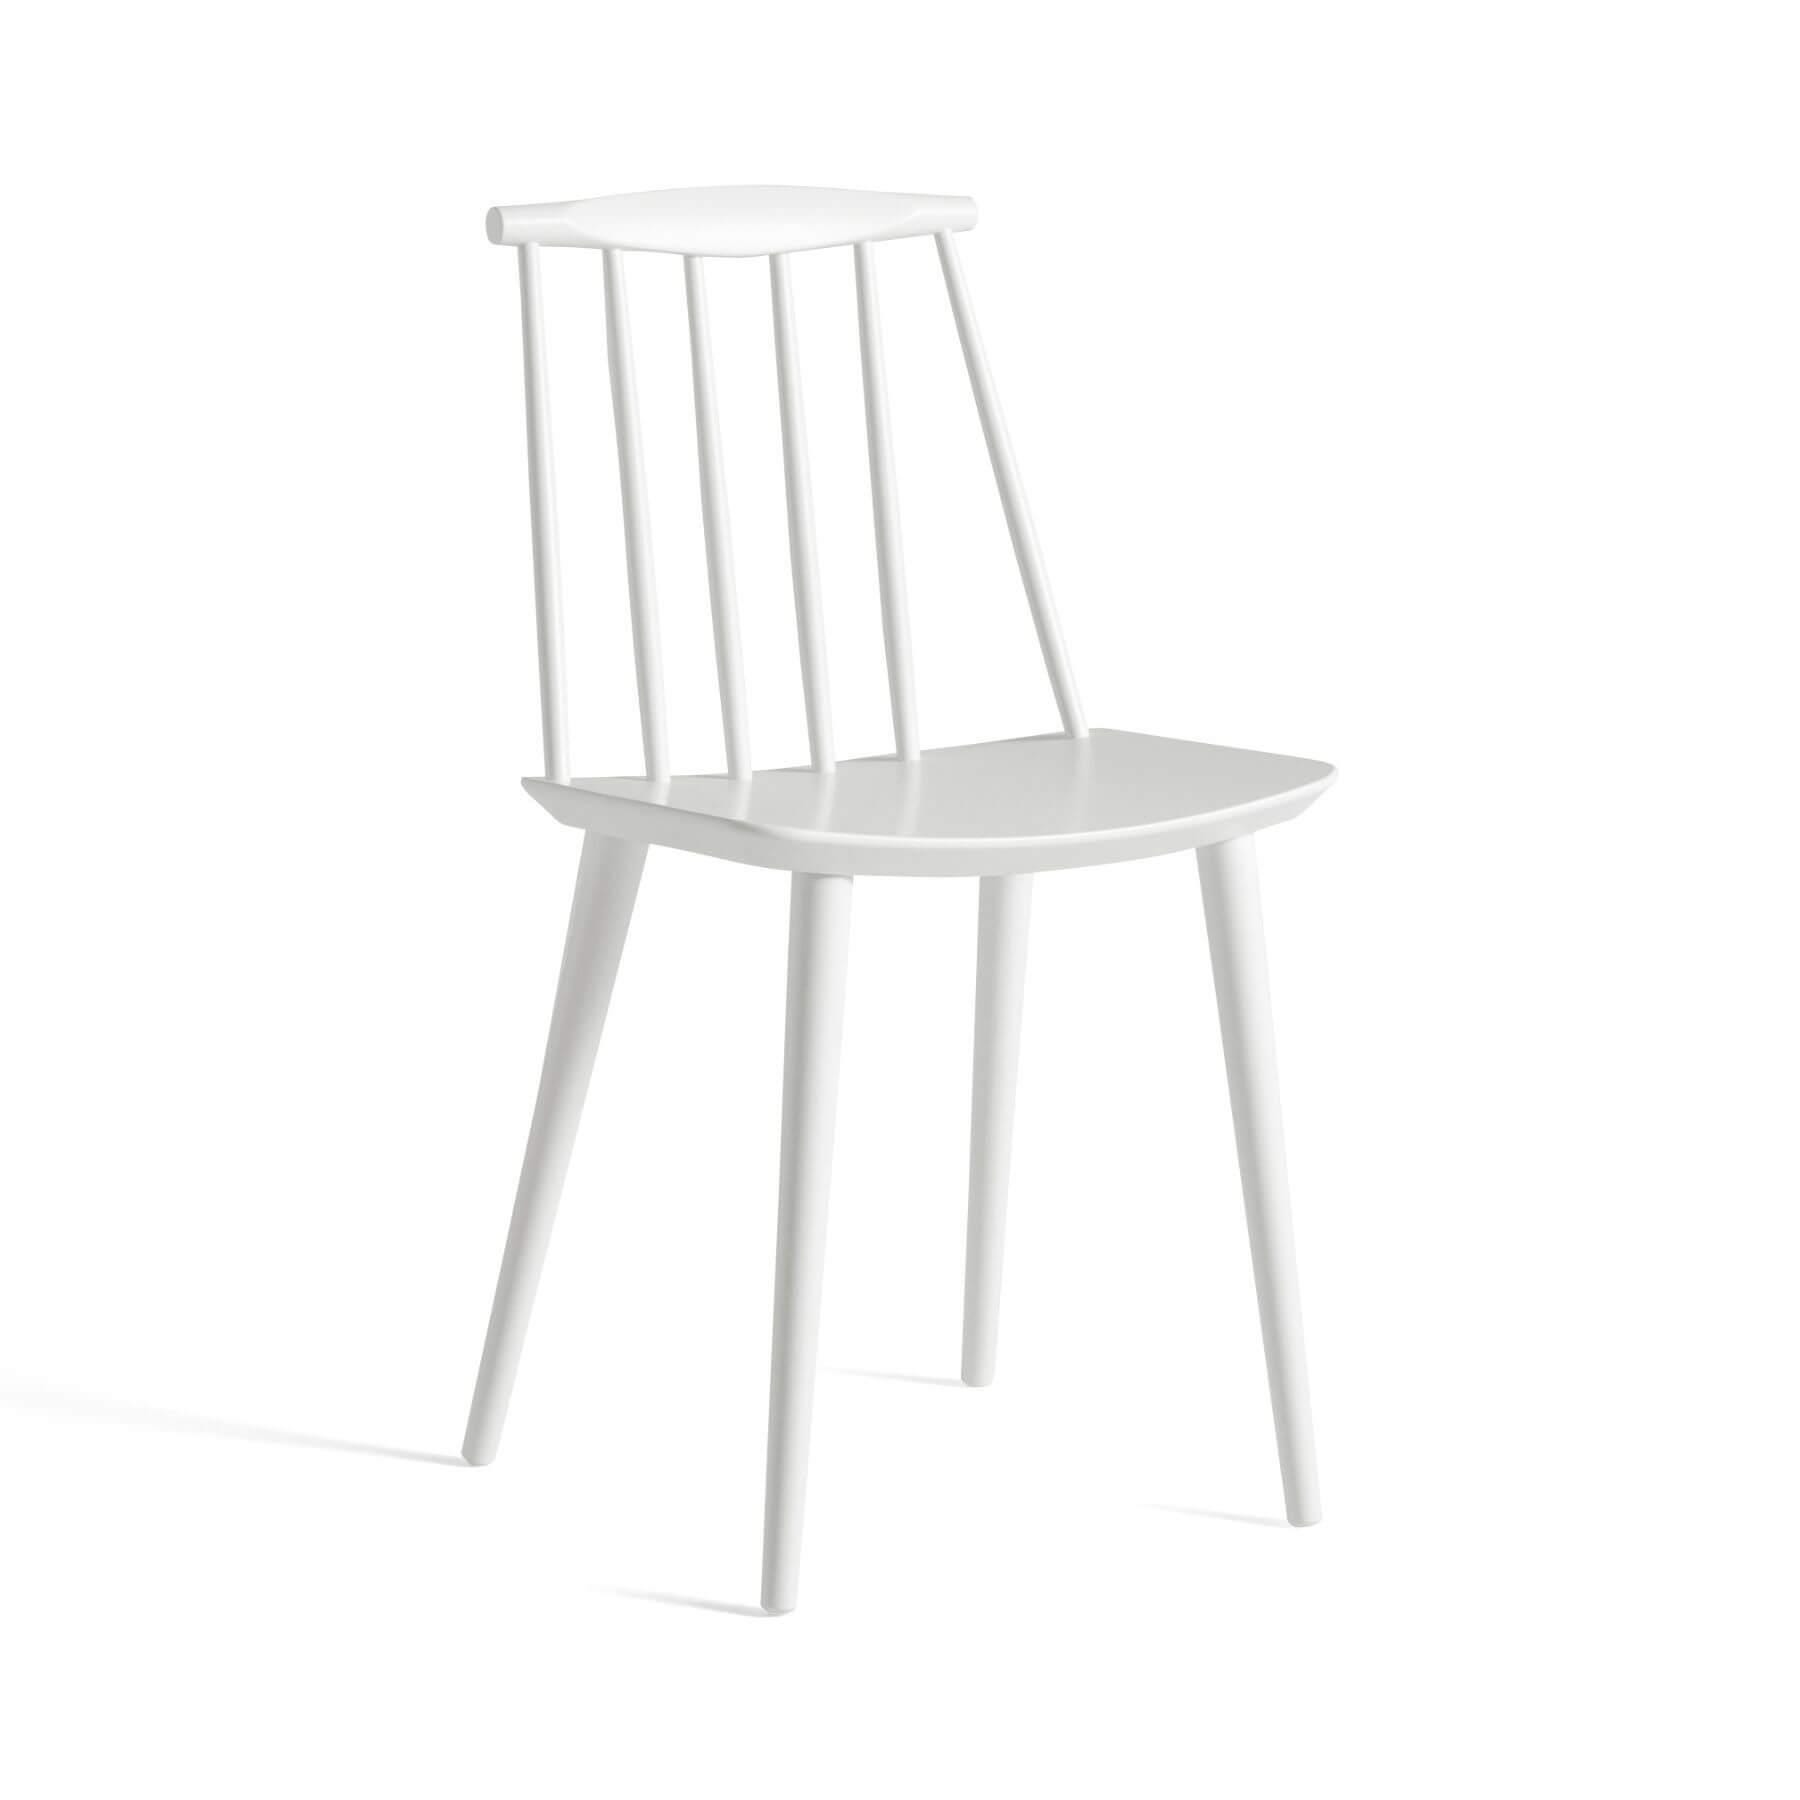 Hay Jseries 77 Dining Chair Beech Lacquered White Designer Furniture From Holloways Of Ludlow